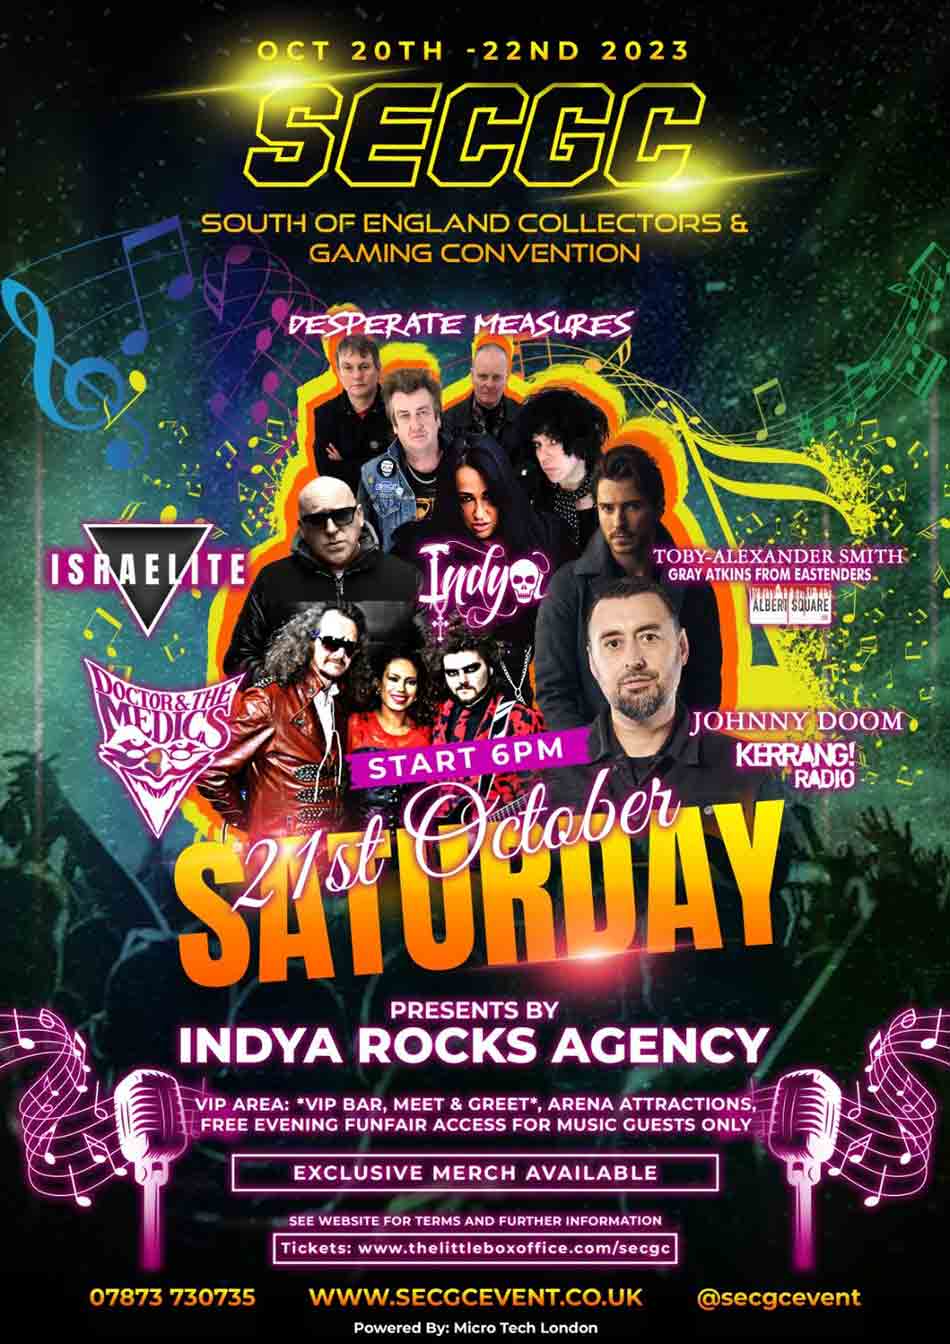 WIN!!! TICKETS TO SECGC - MUSIC/CELEB/COMIC CON SHOW - DR & THE MEDICS, INDYA, DESPERATE MEASURES, JOHNNY DOOM AND MORE!!!